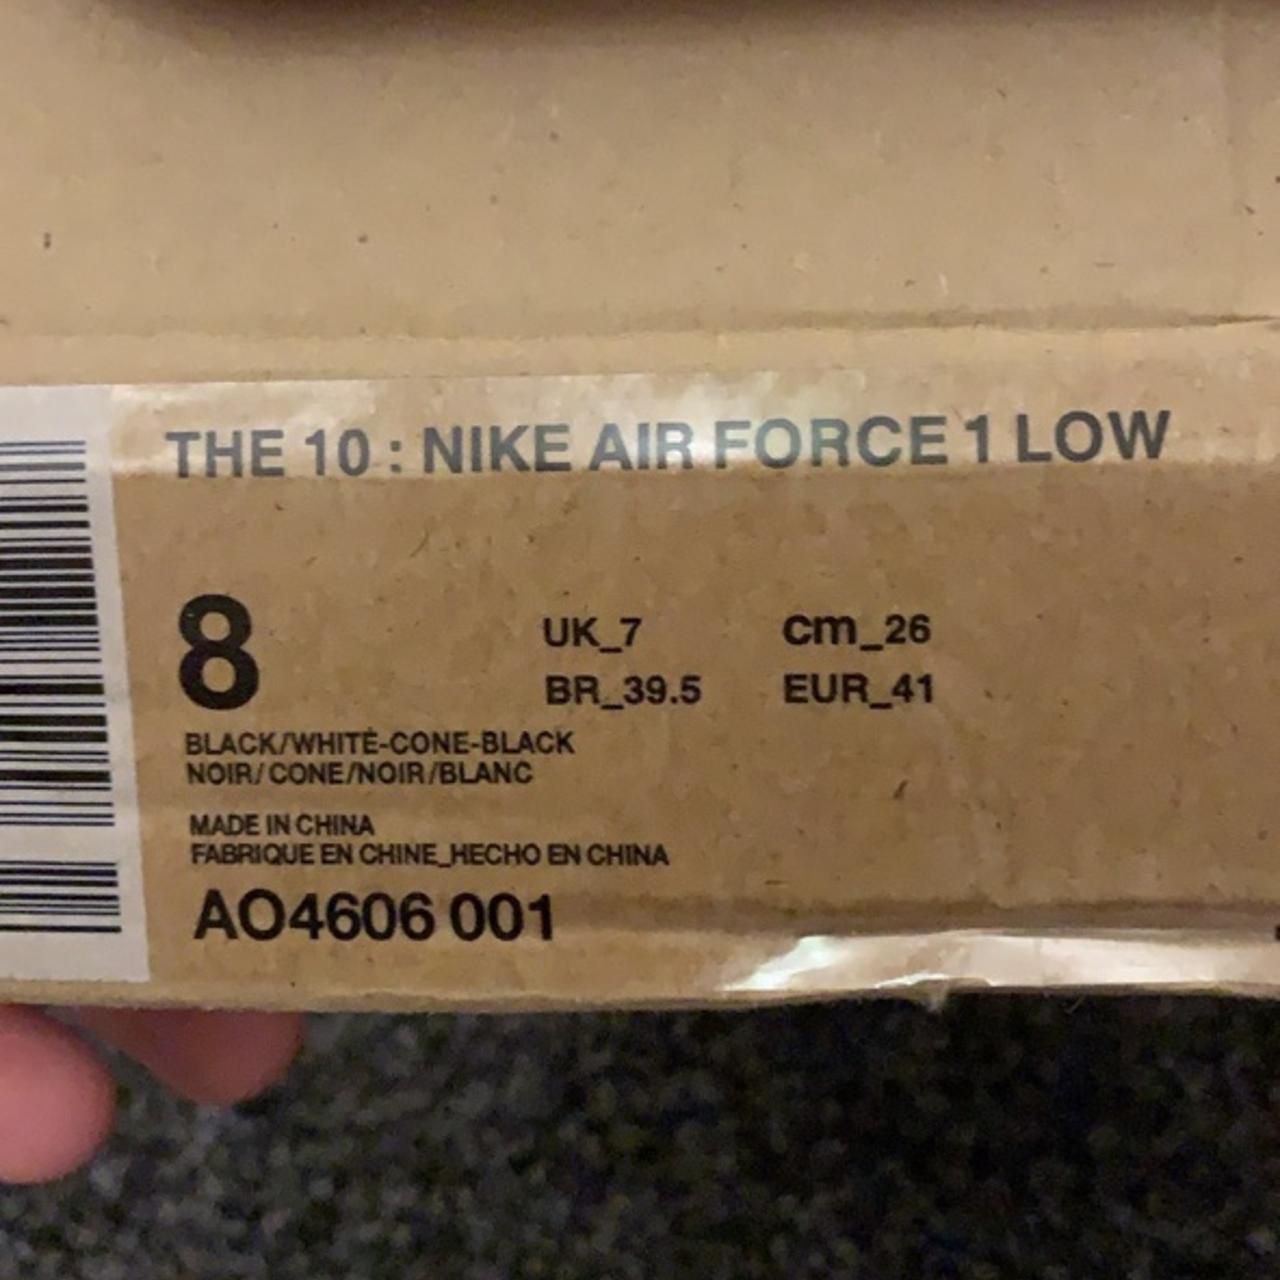 Offwhite Air Force 1 “moma” comes with og box, - Depop